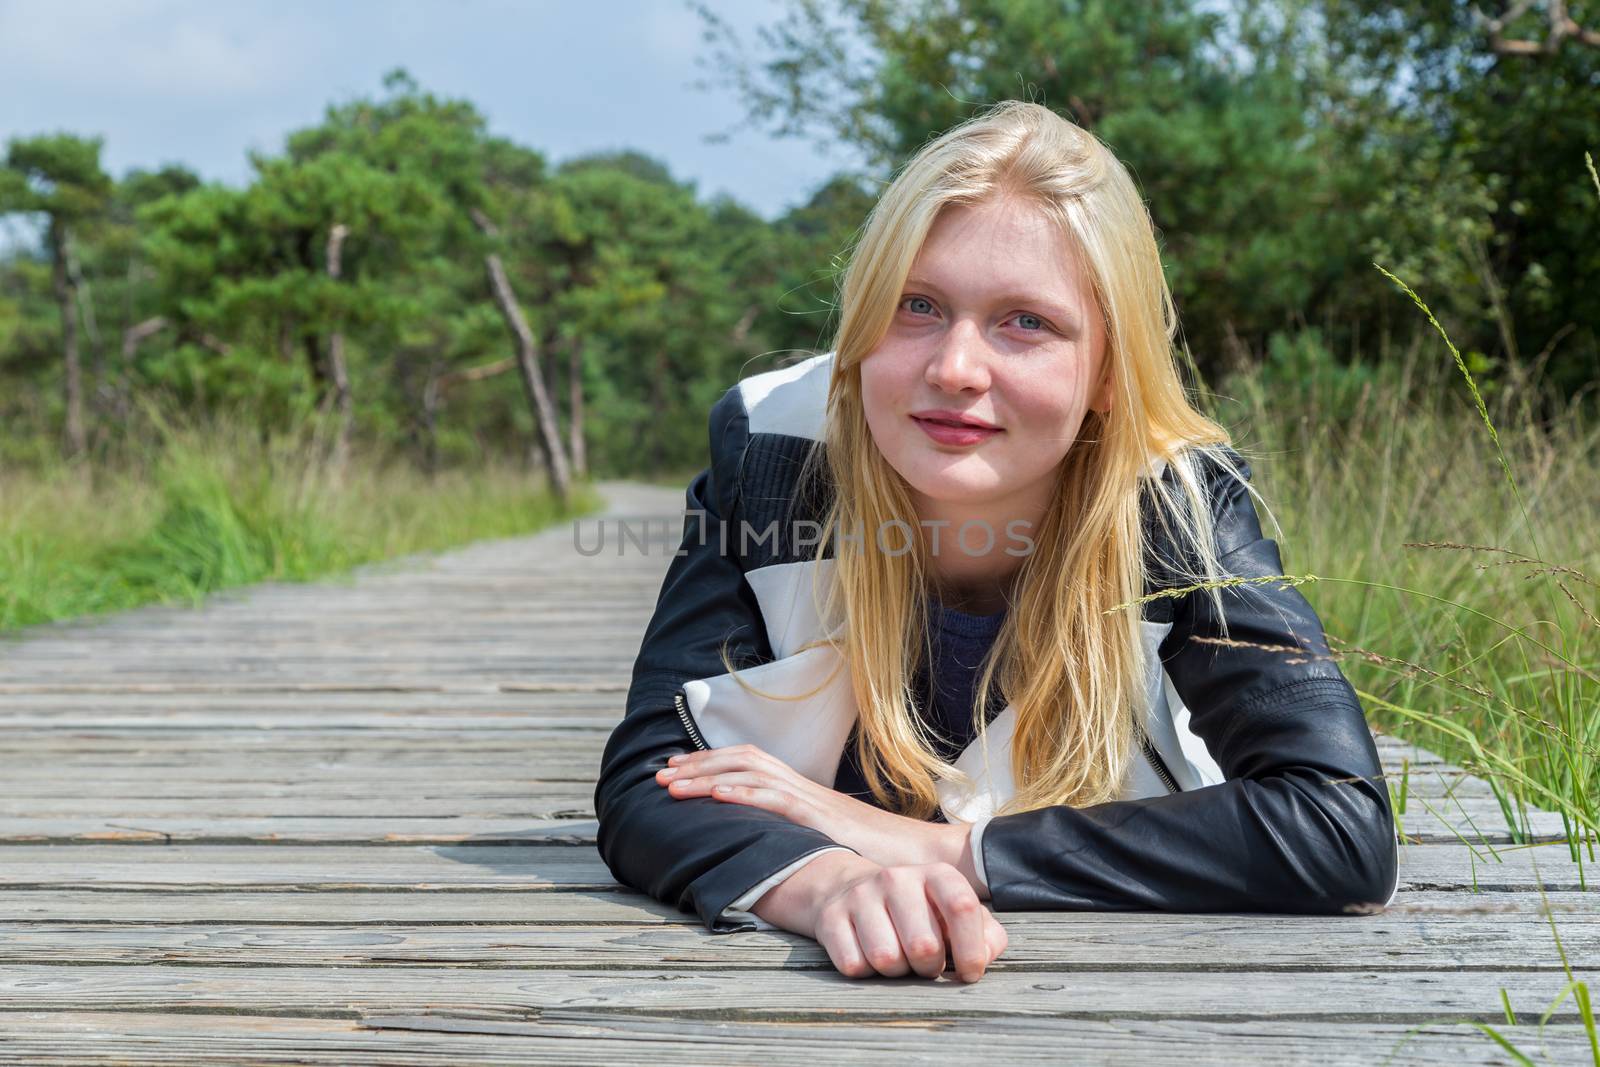 Blonde girl lying on wooden path in nature by BenSchonewille